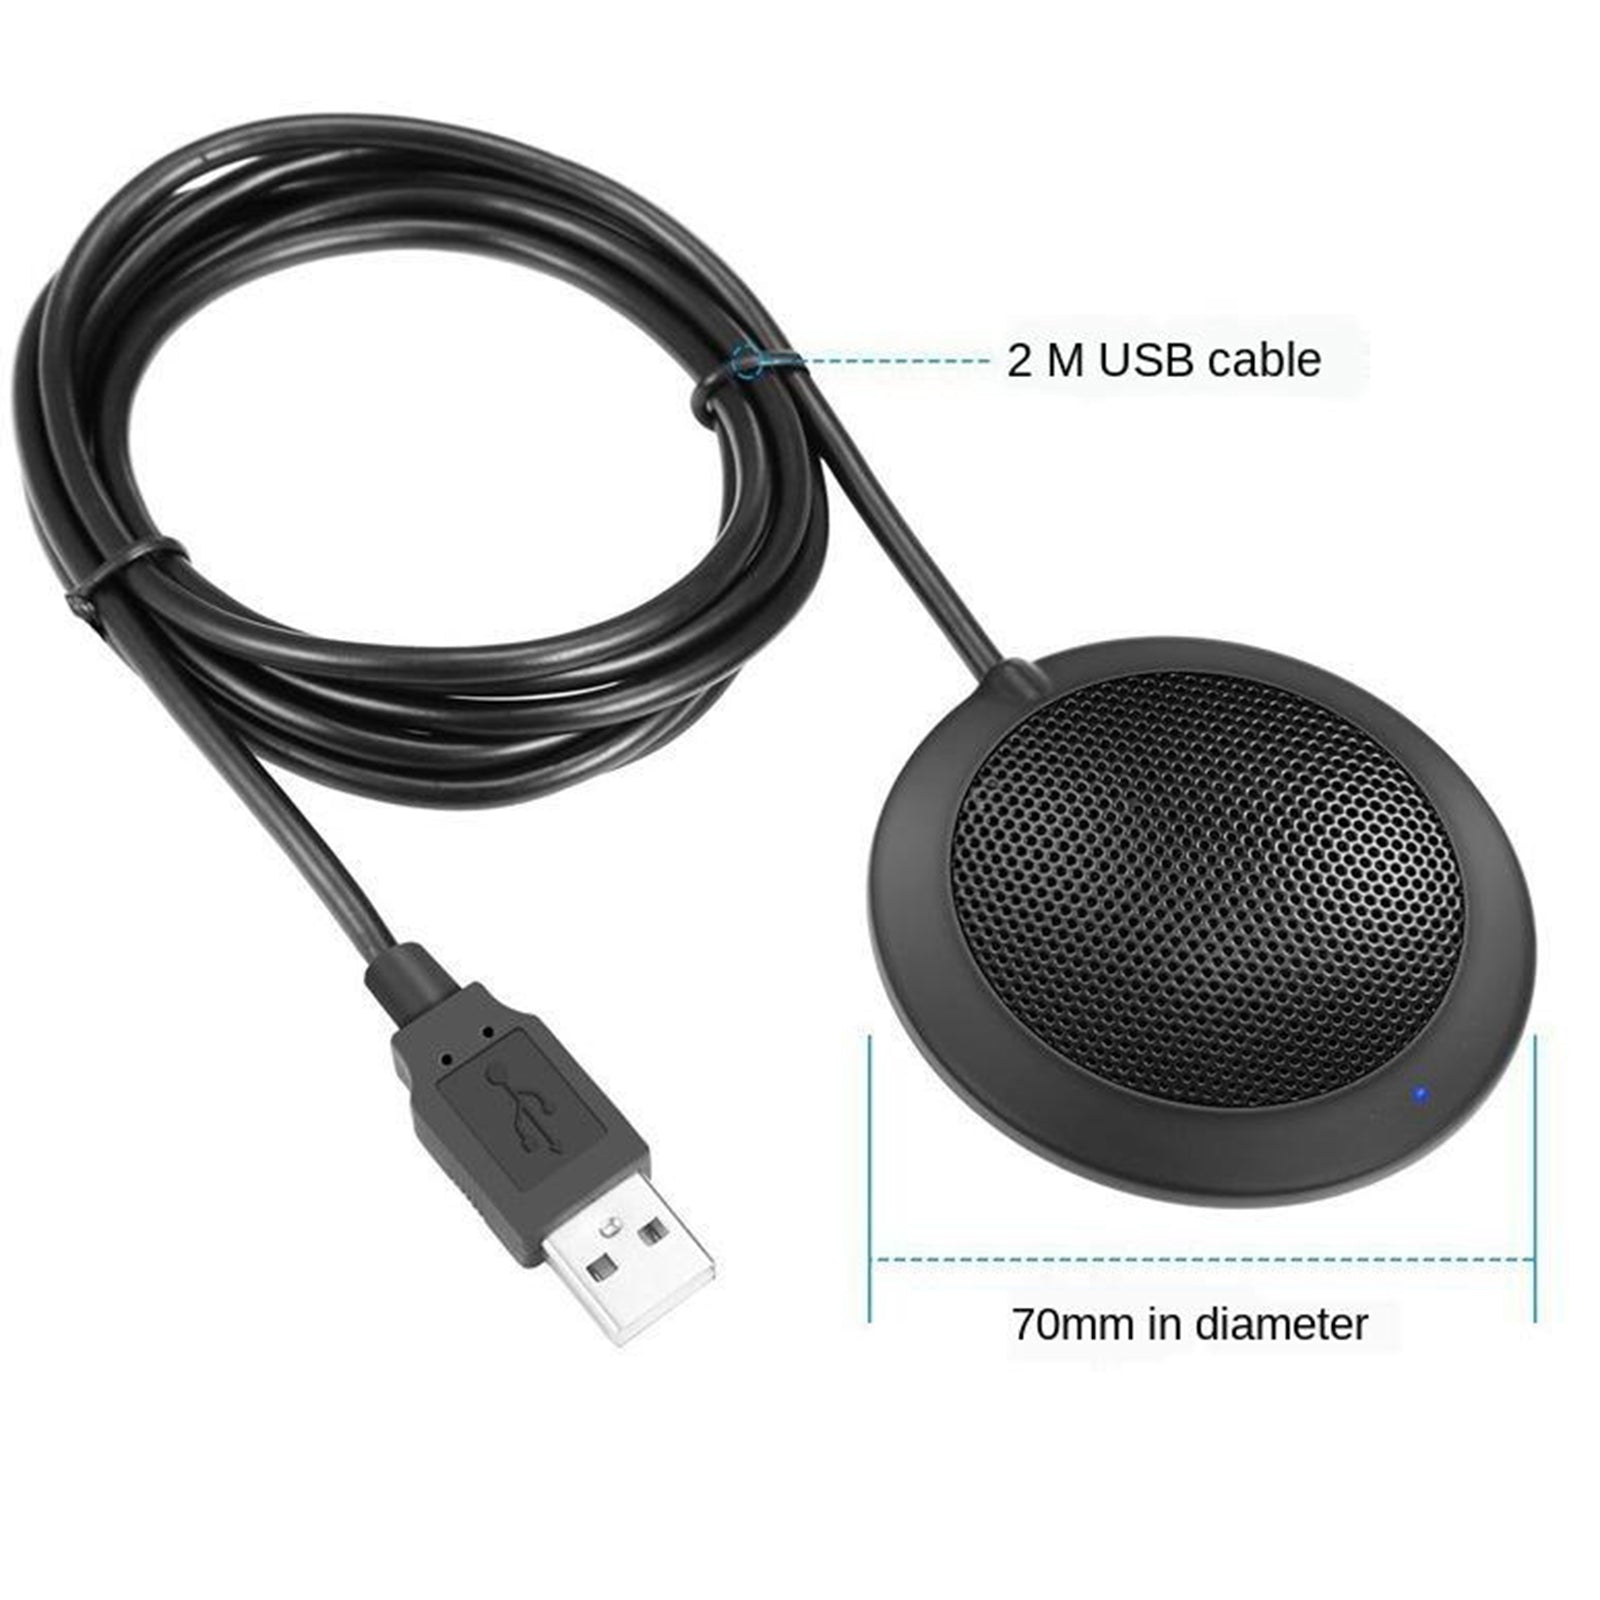 Omni-Directional 360Degree Conference Microphone USB for Desktop Conference